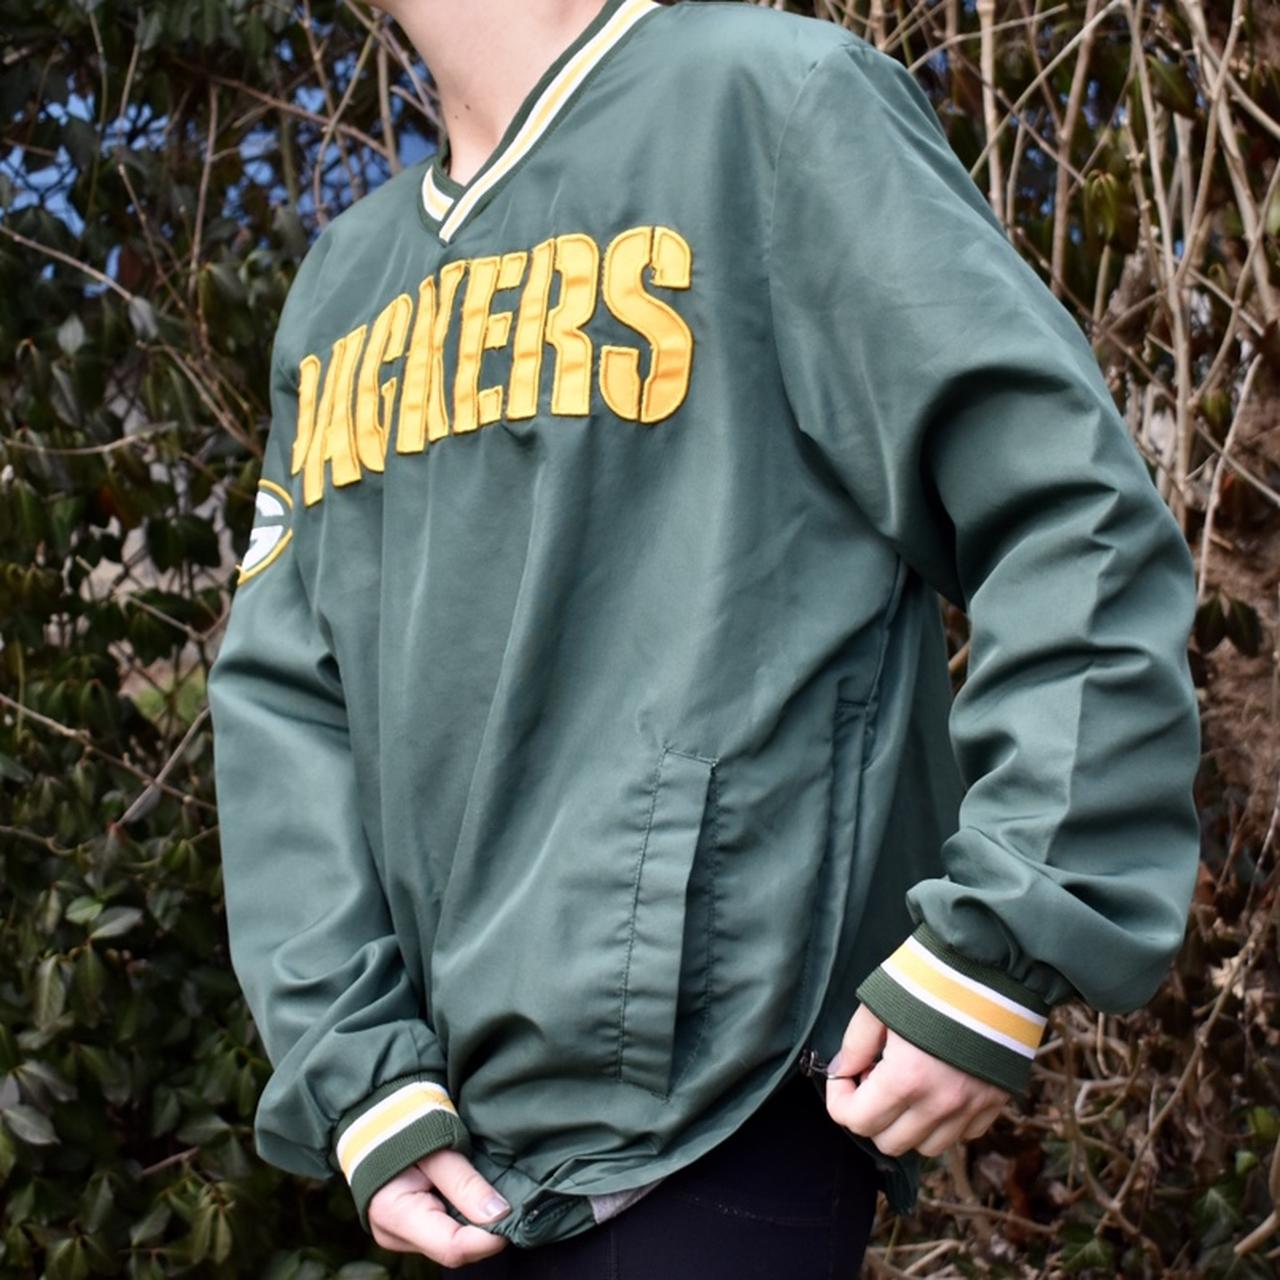 Product Image 2 - Vintage Packets Windbreaker

Authentic NFL

Size: Small
Condition: